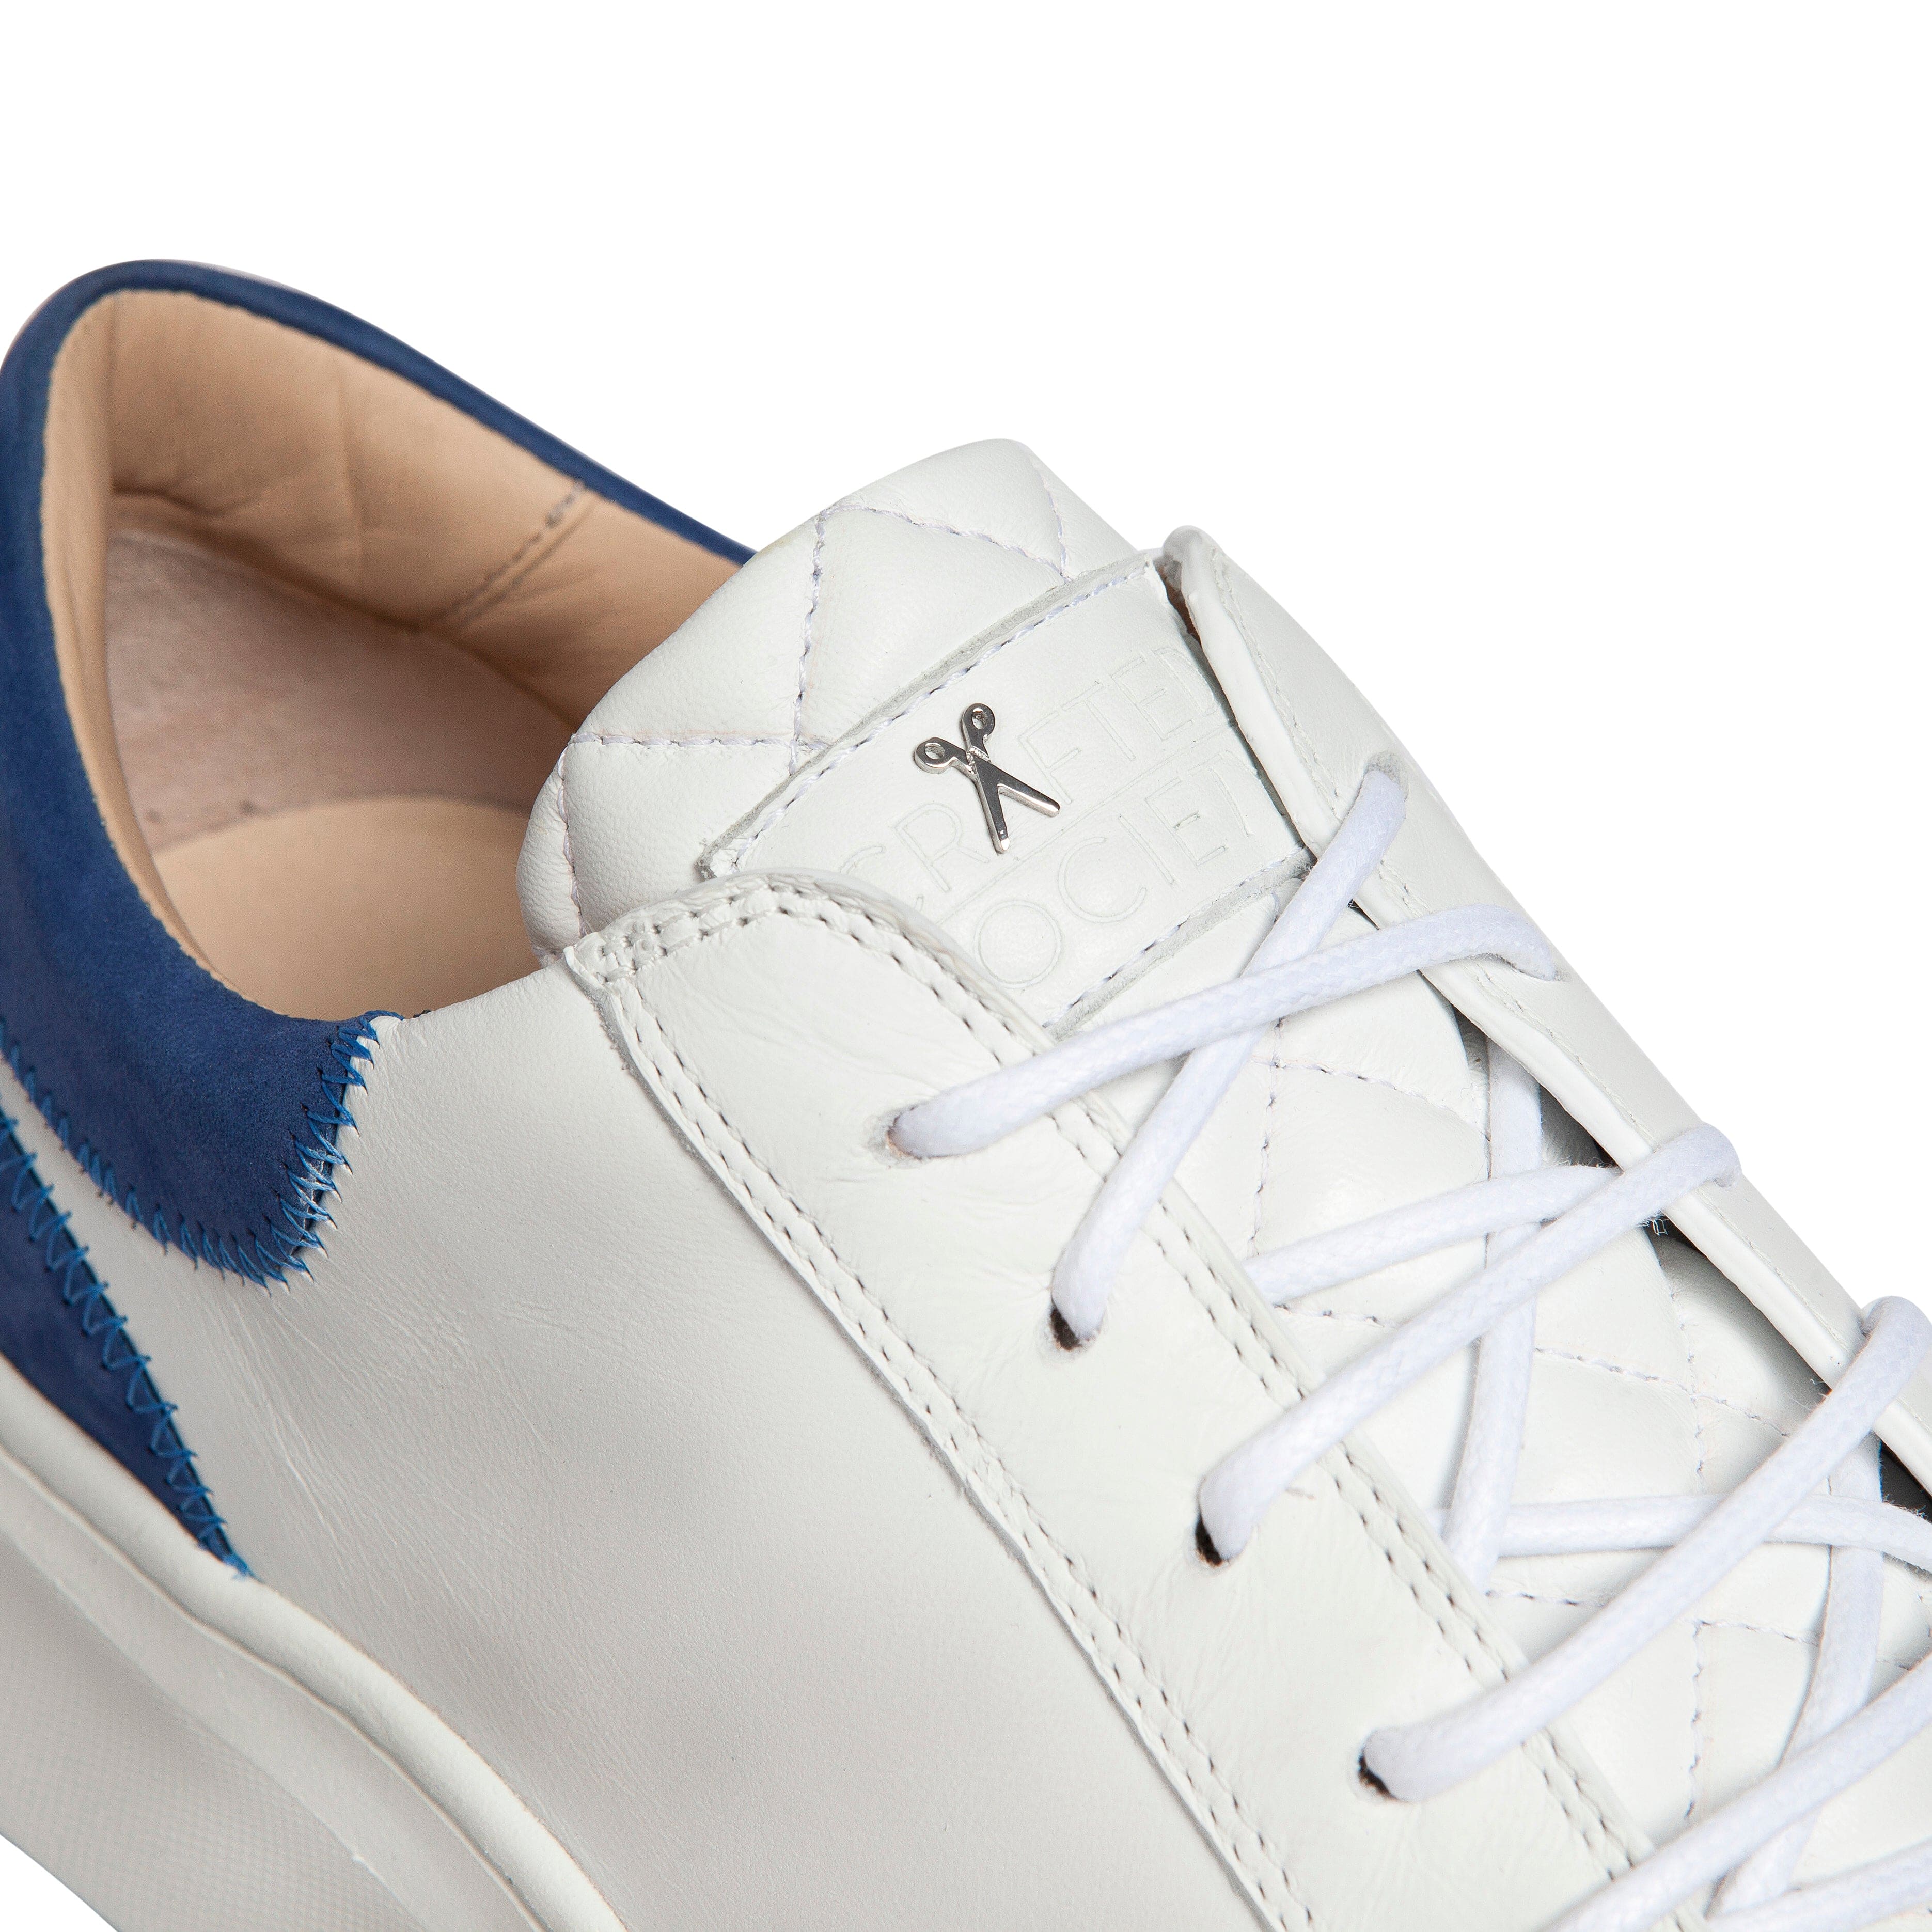 Matteo Low Top Sneaker | White & Royal Blue Full Grain Leather | Made in Italy